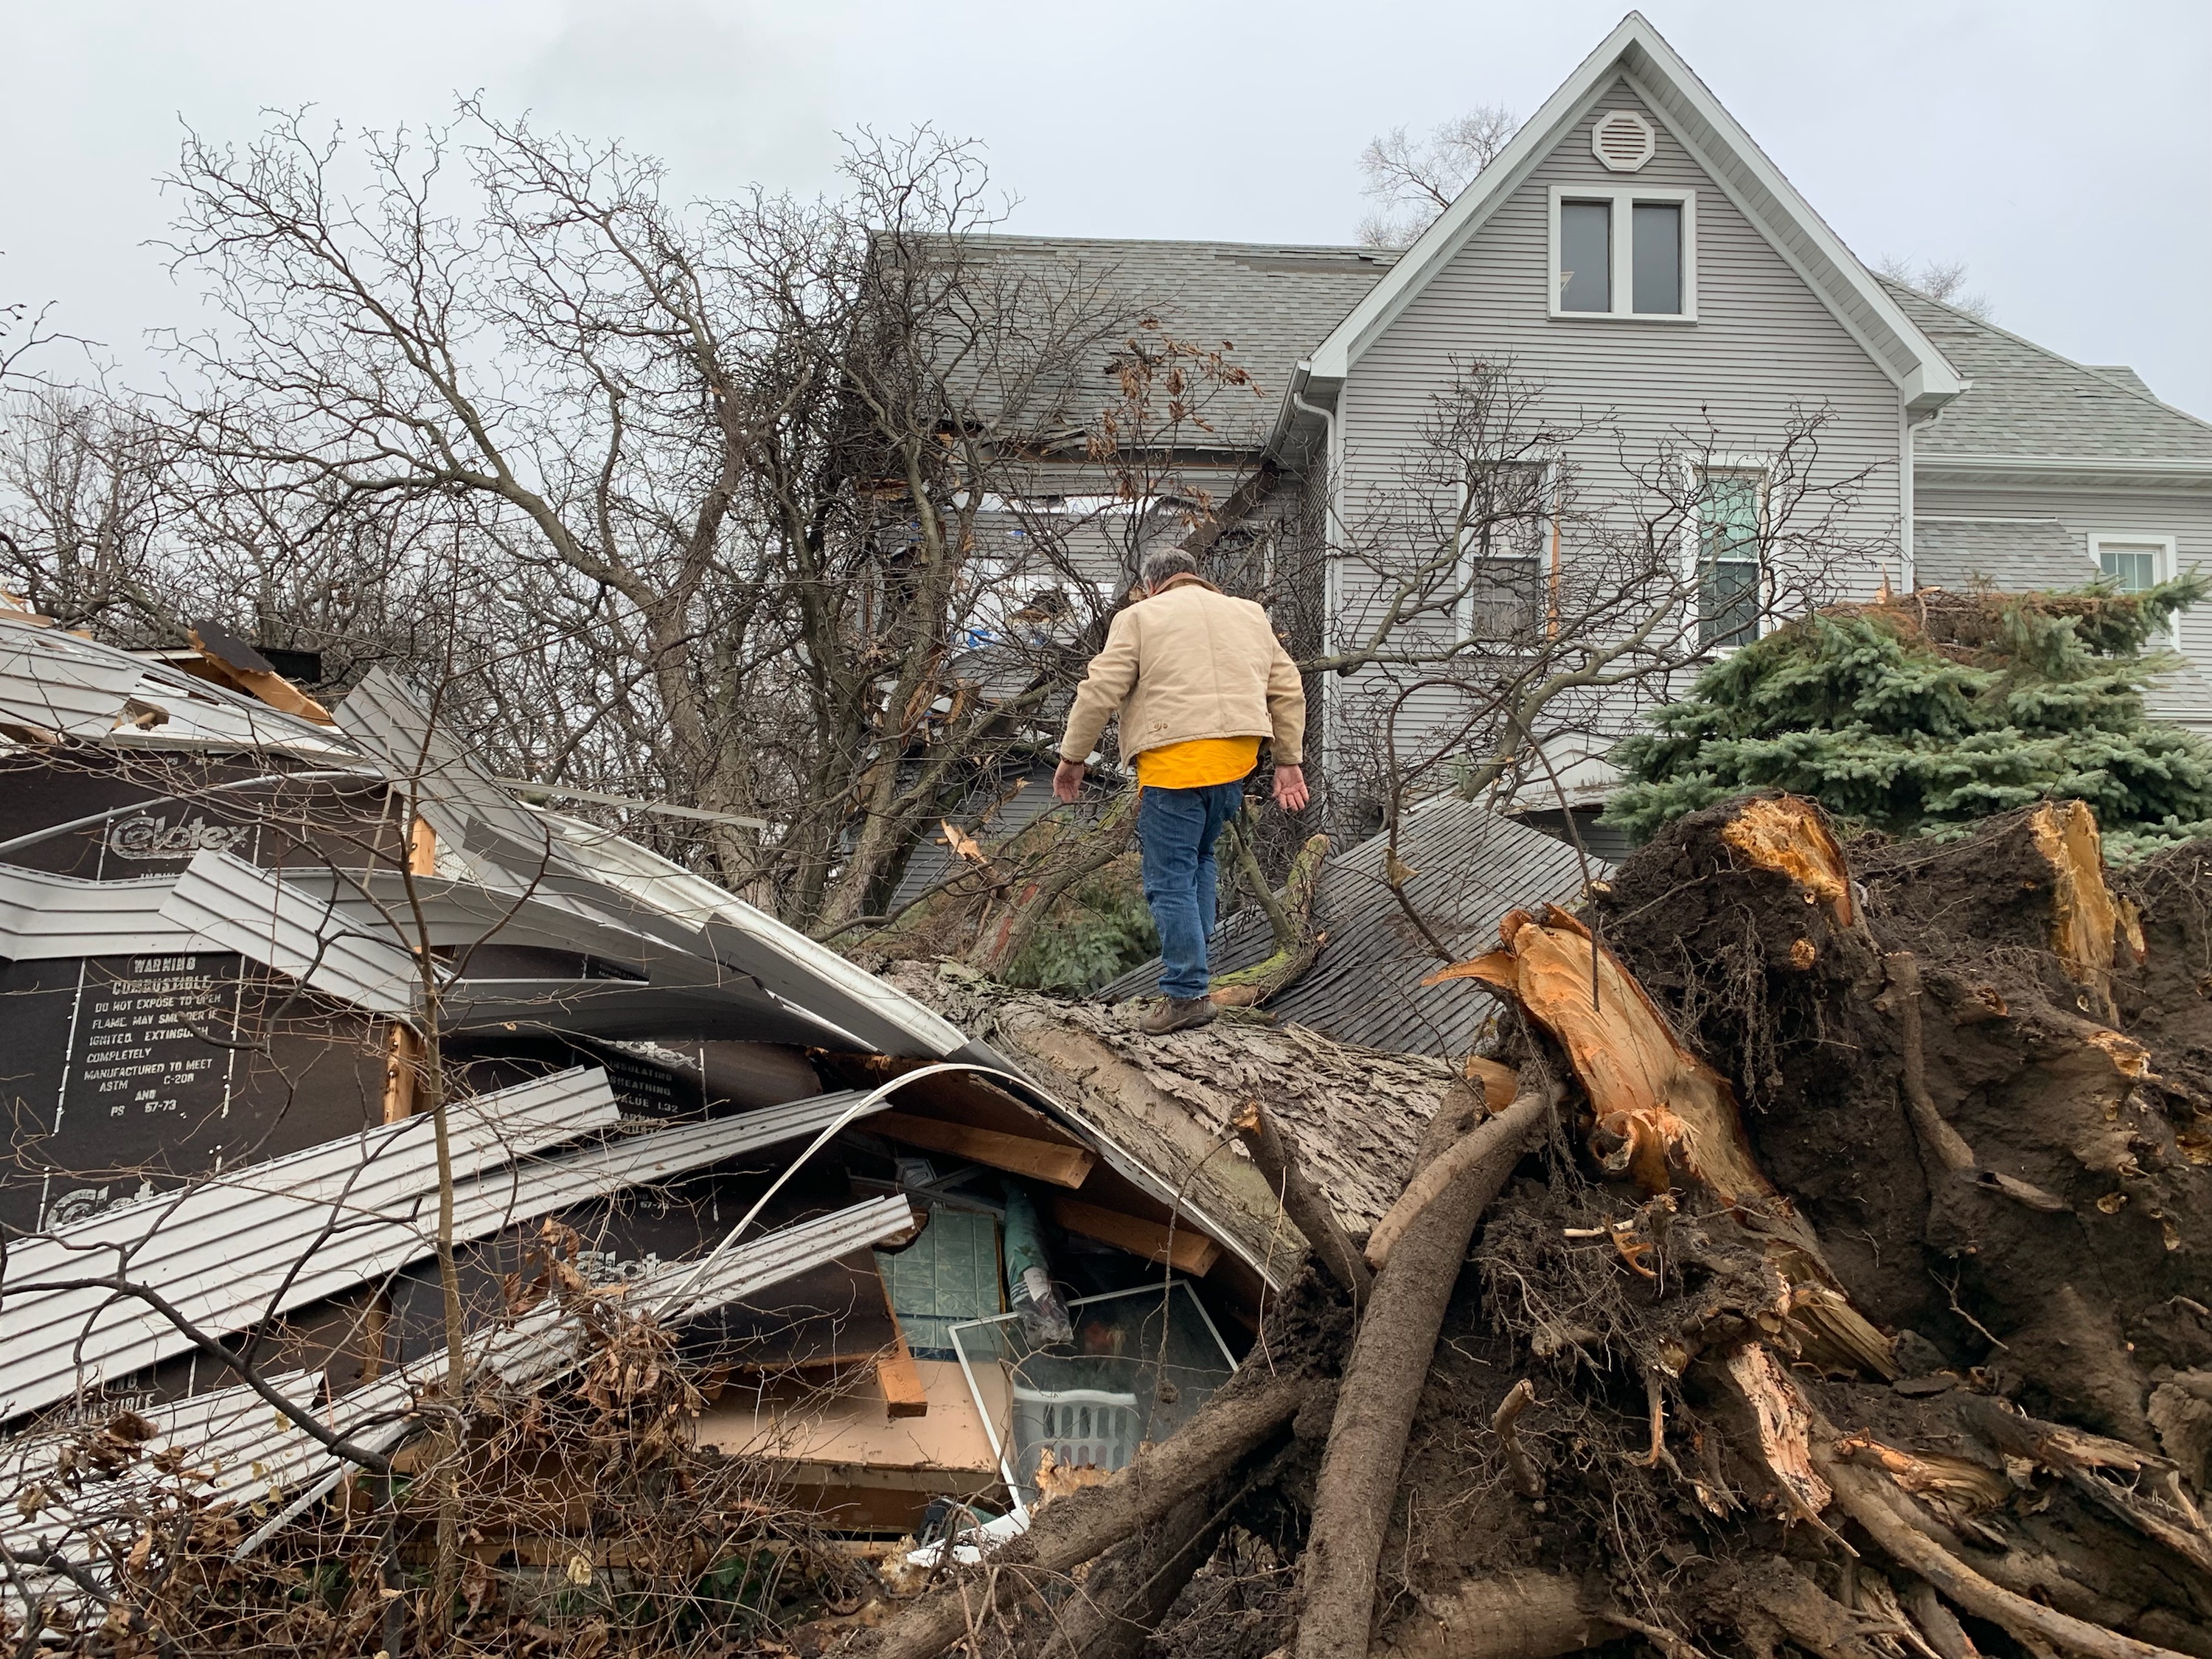 Disaster Relief responds after Taylorville tornado - IBSA News